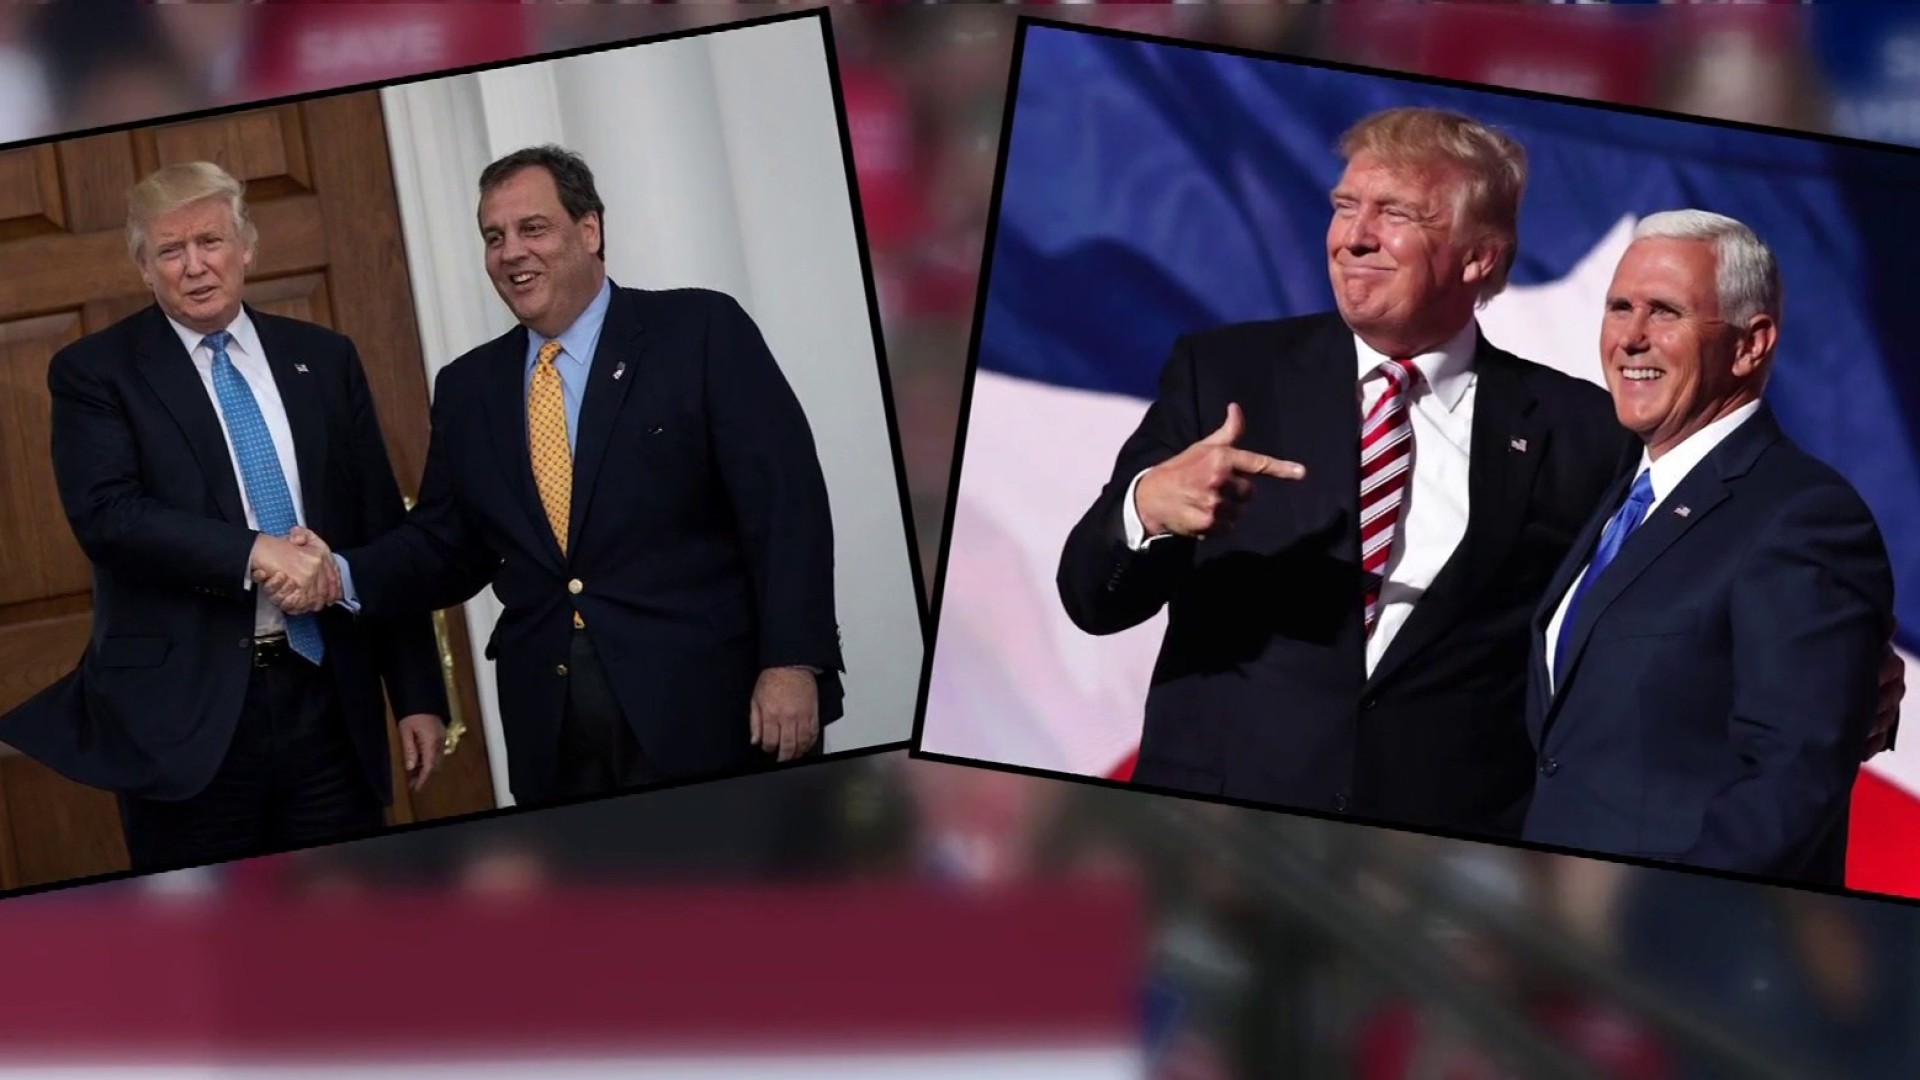 GOP presidential race heating up as Pence and Christie expected to announce their candidacies